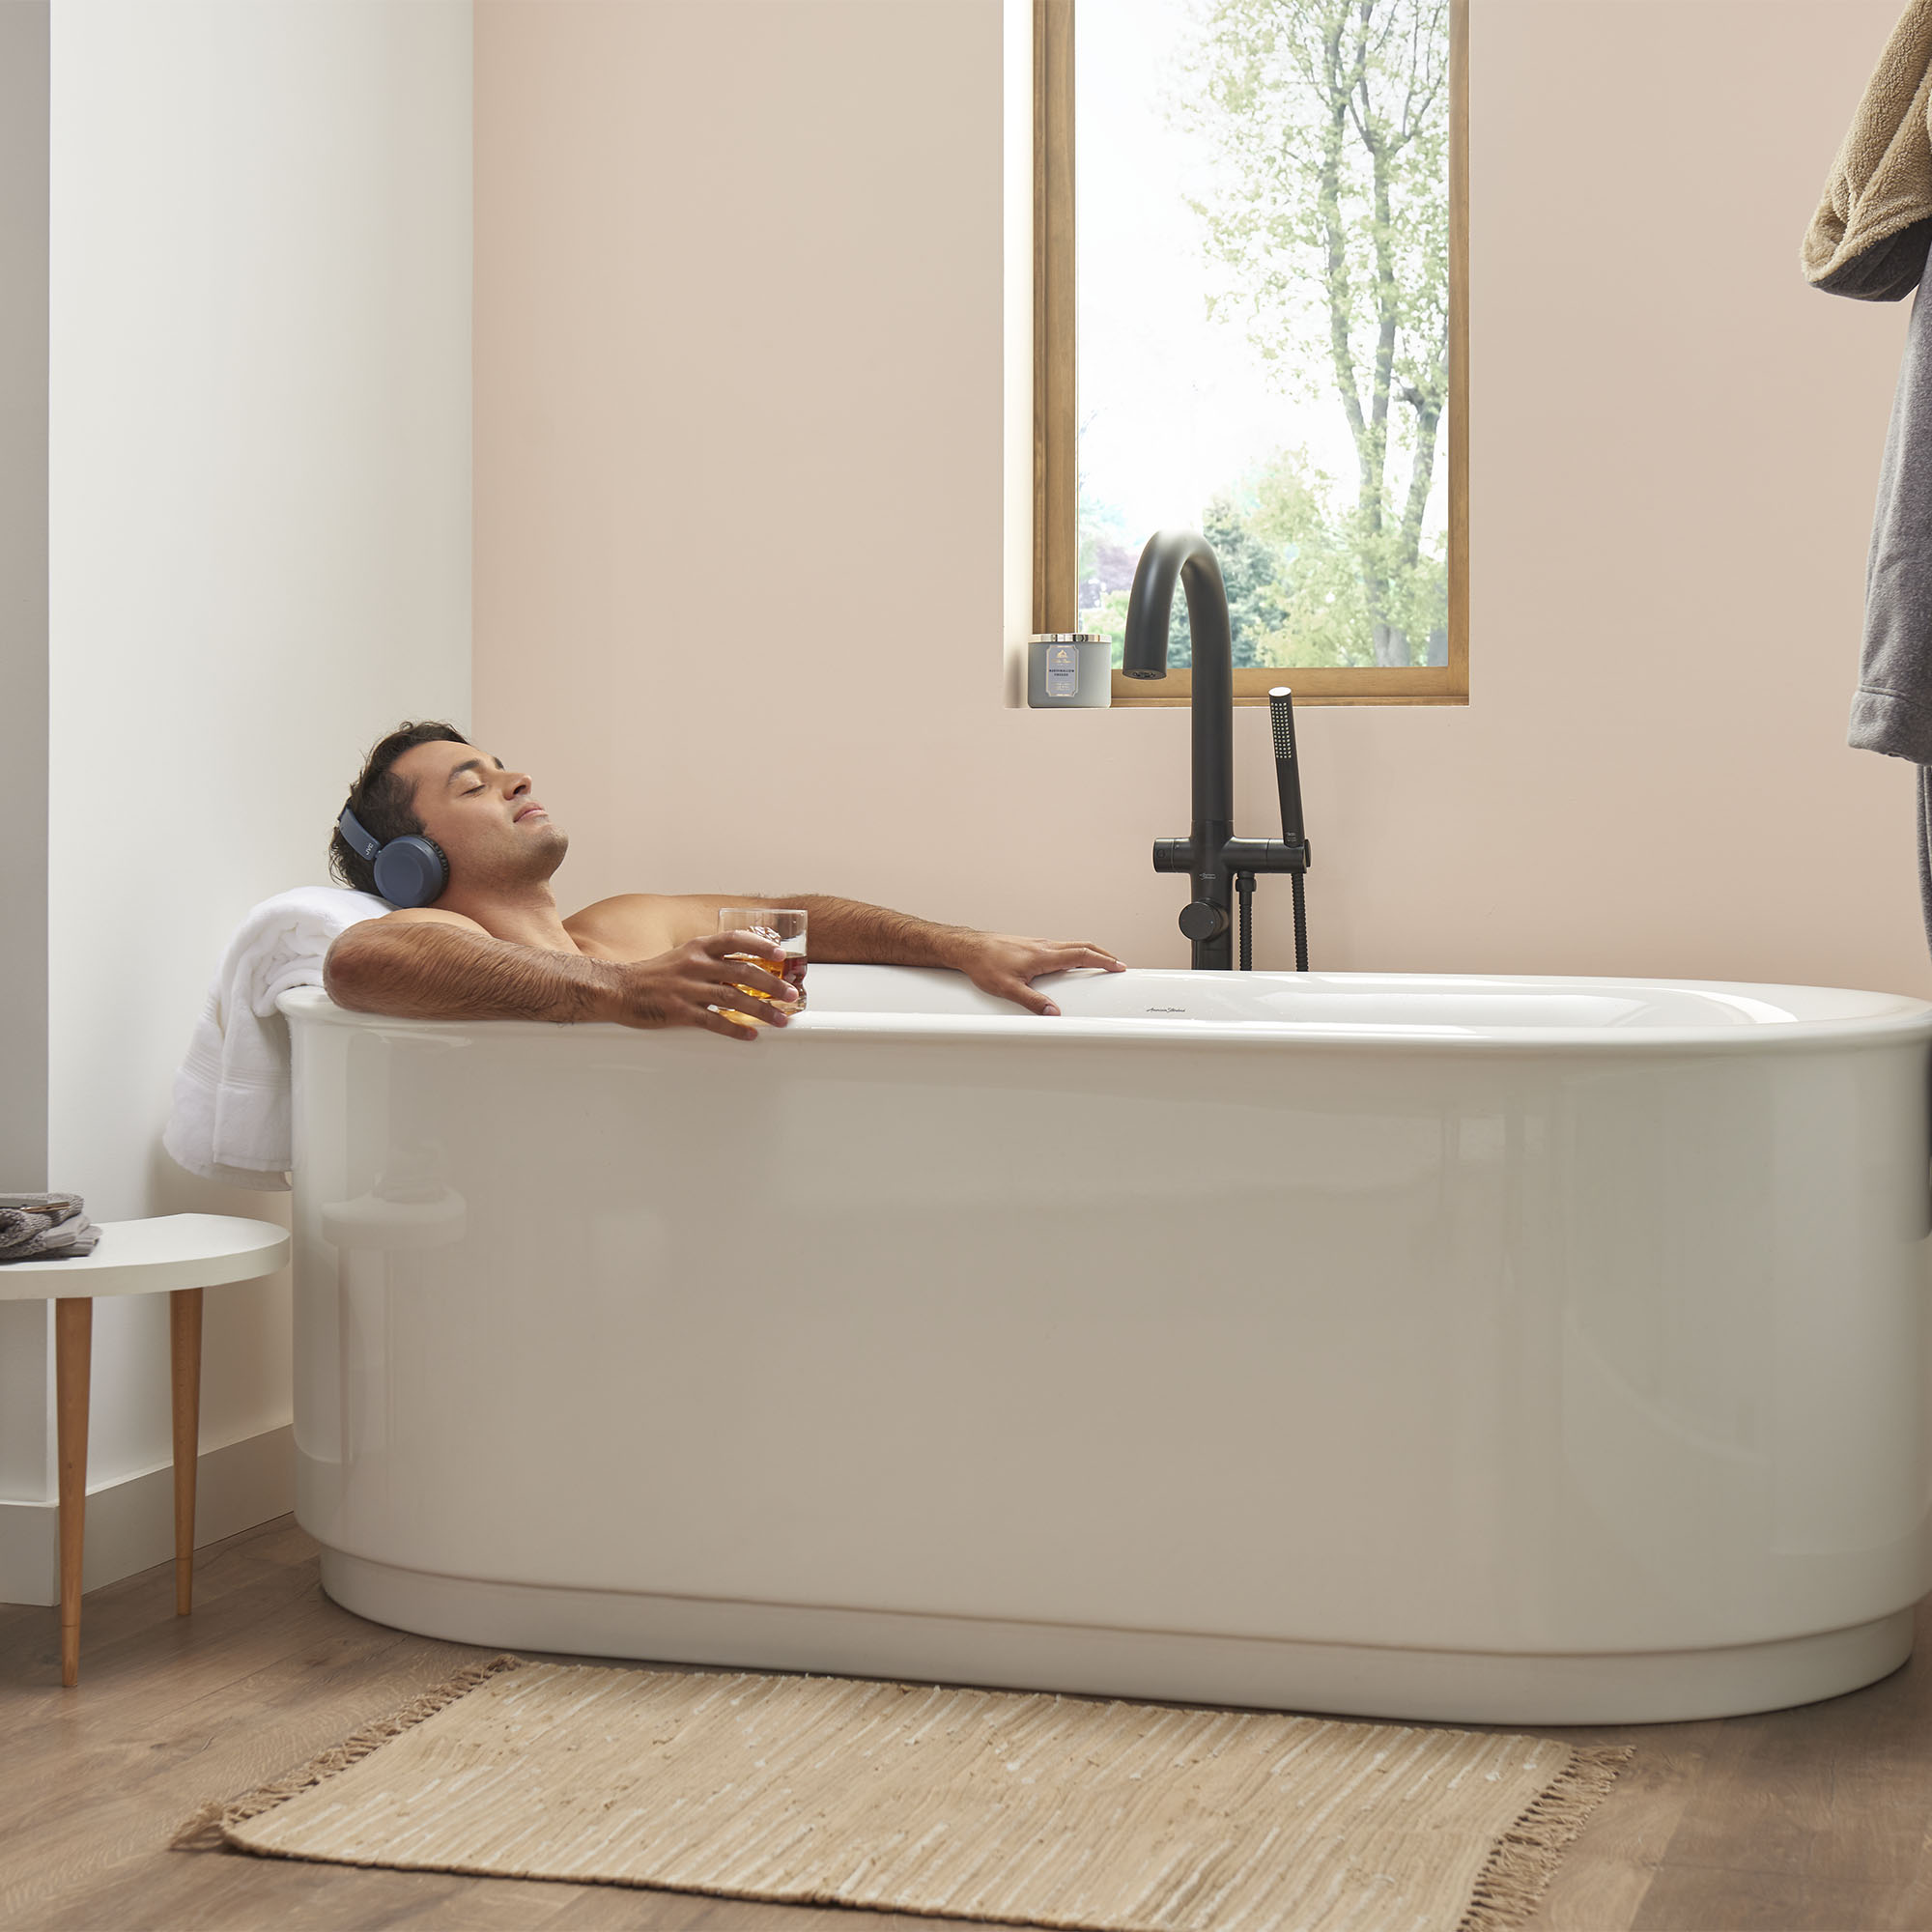 Contemporary Round Freestanding Bathtub With Lever Handle Faucet for Flash™ Rough-In Valve